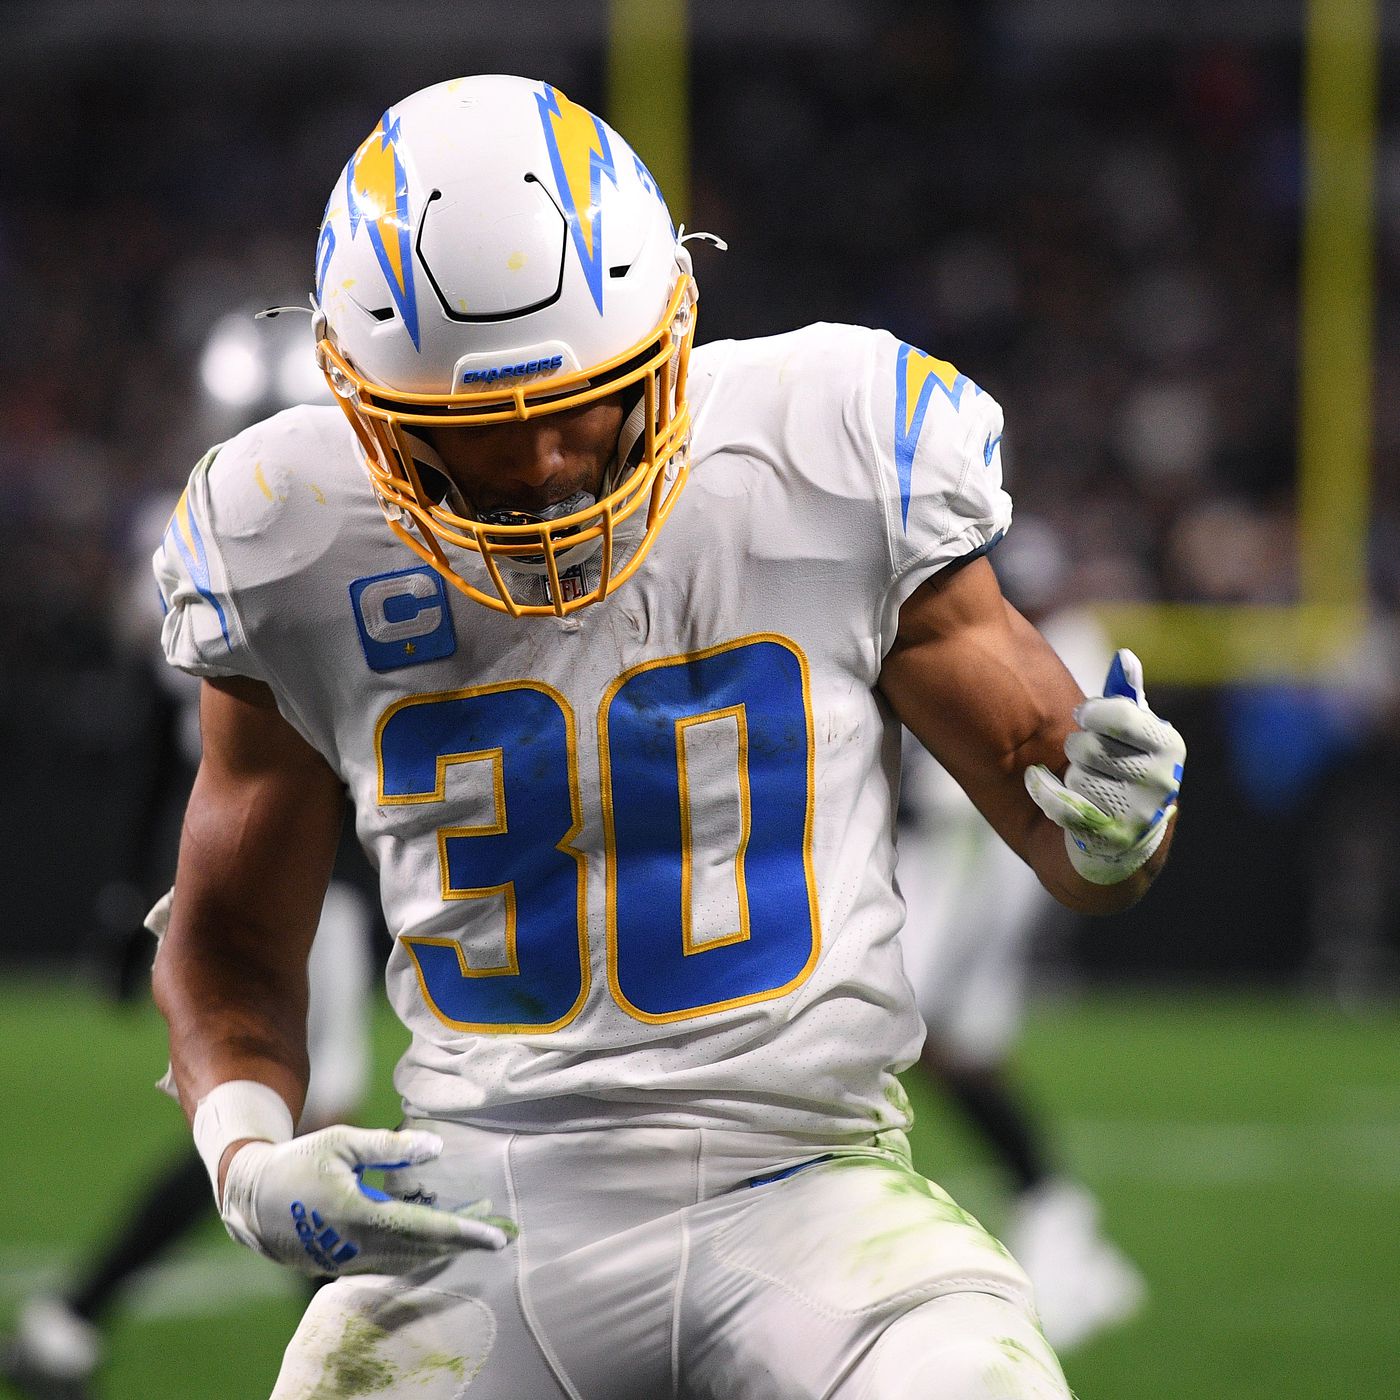 Los Angeles Chargers Schedule 2022 Chargers Schedule: 2022 Opponents Finalized - Bolts From The Blue